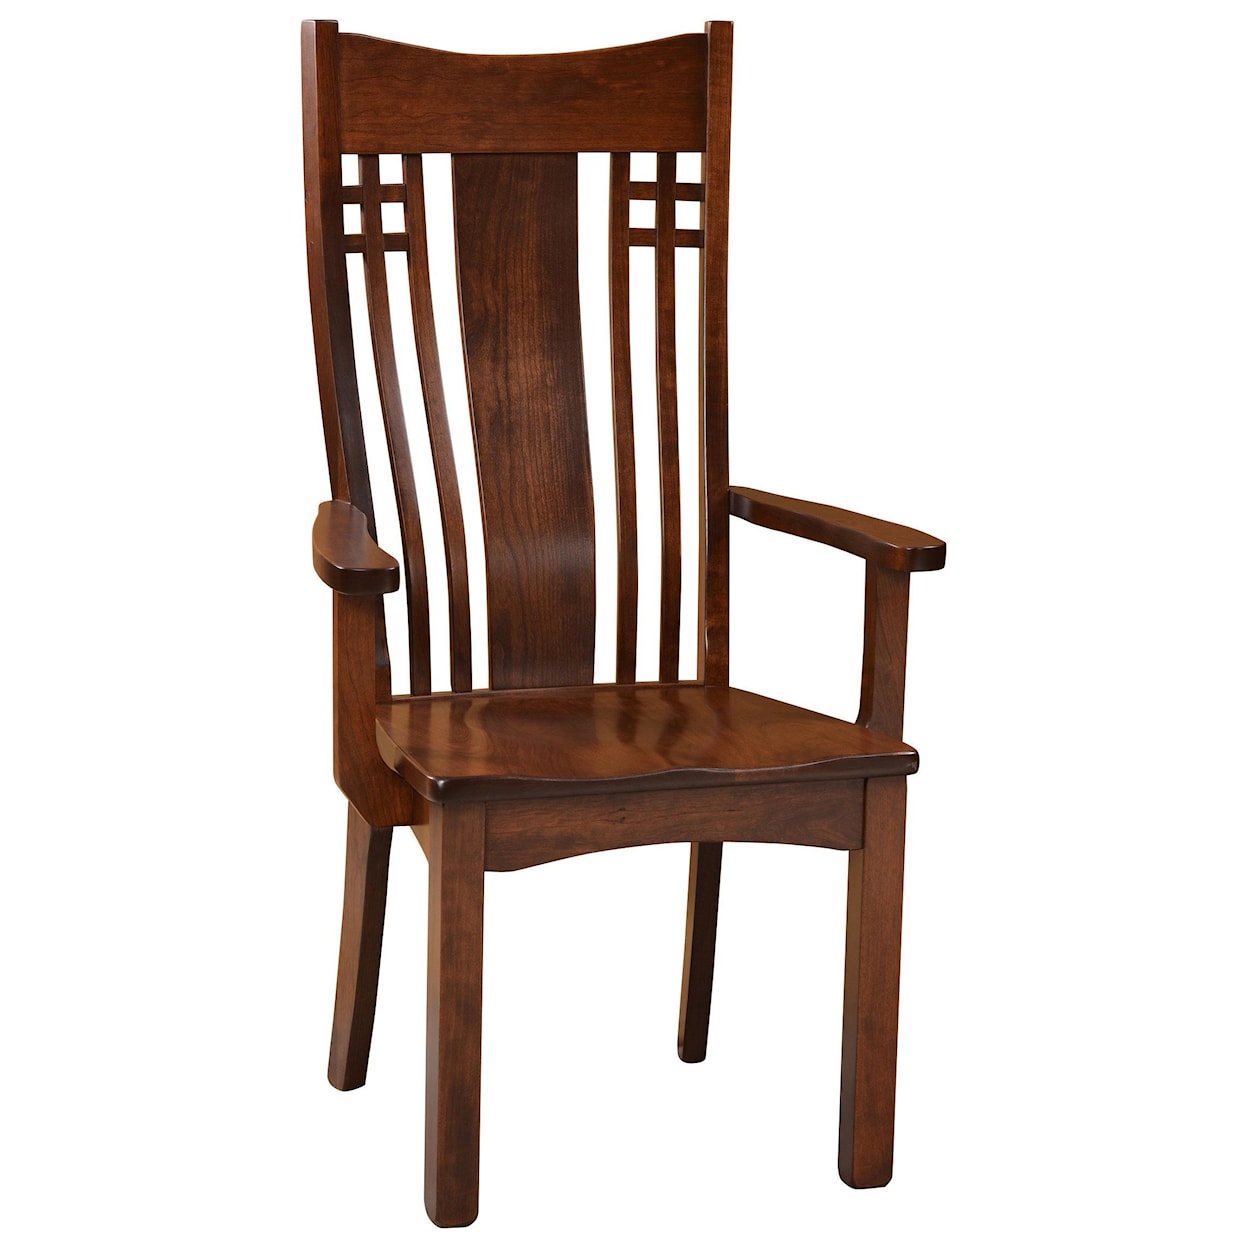 Wengerd Wood Products Larson Arm Chair